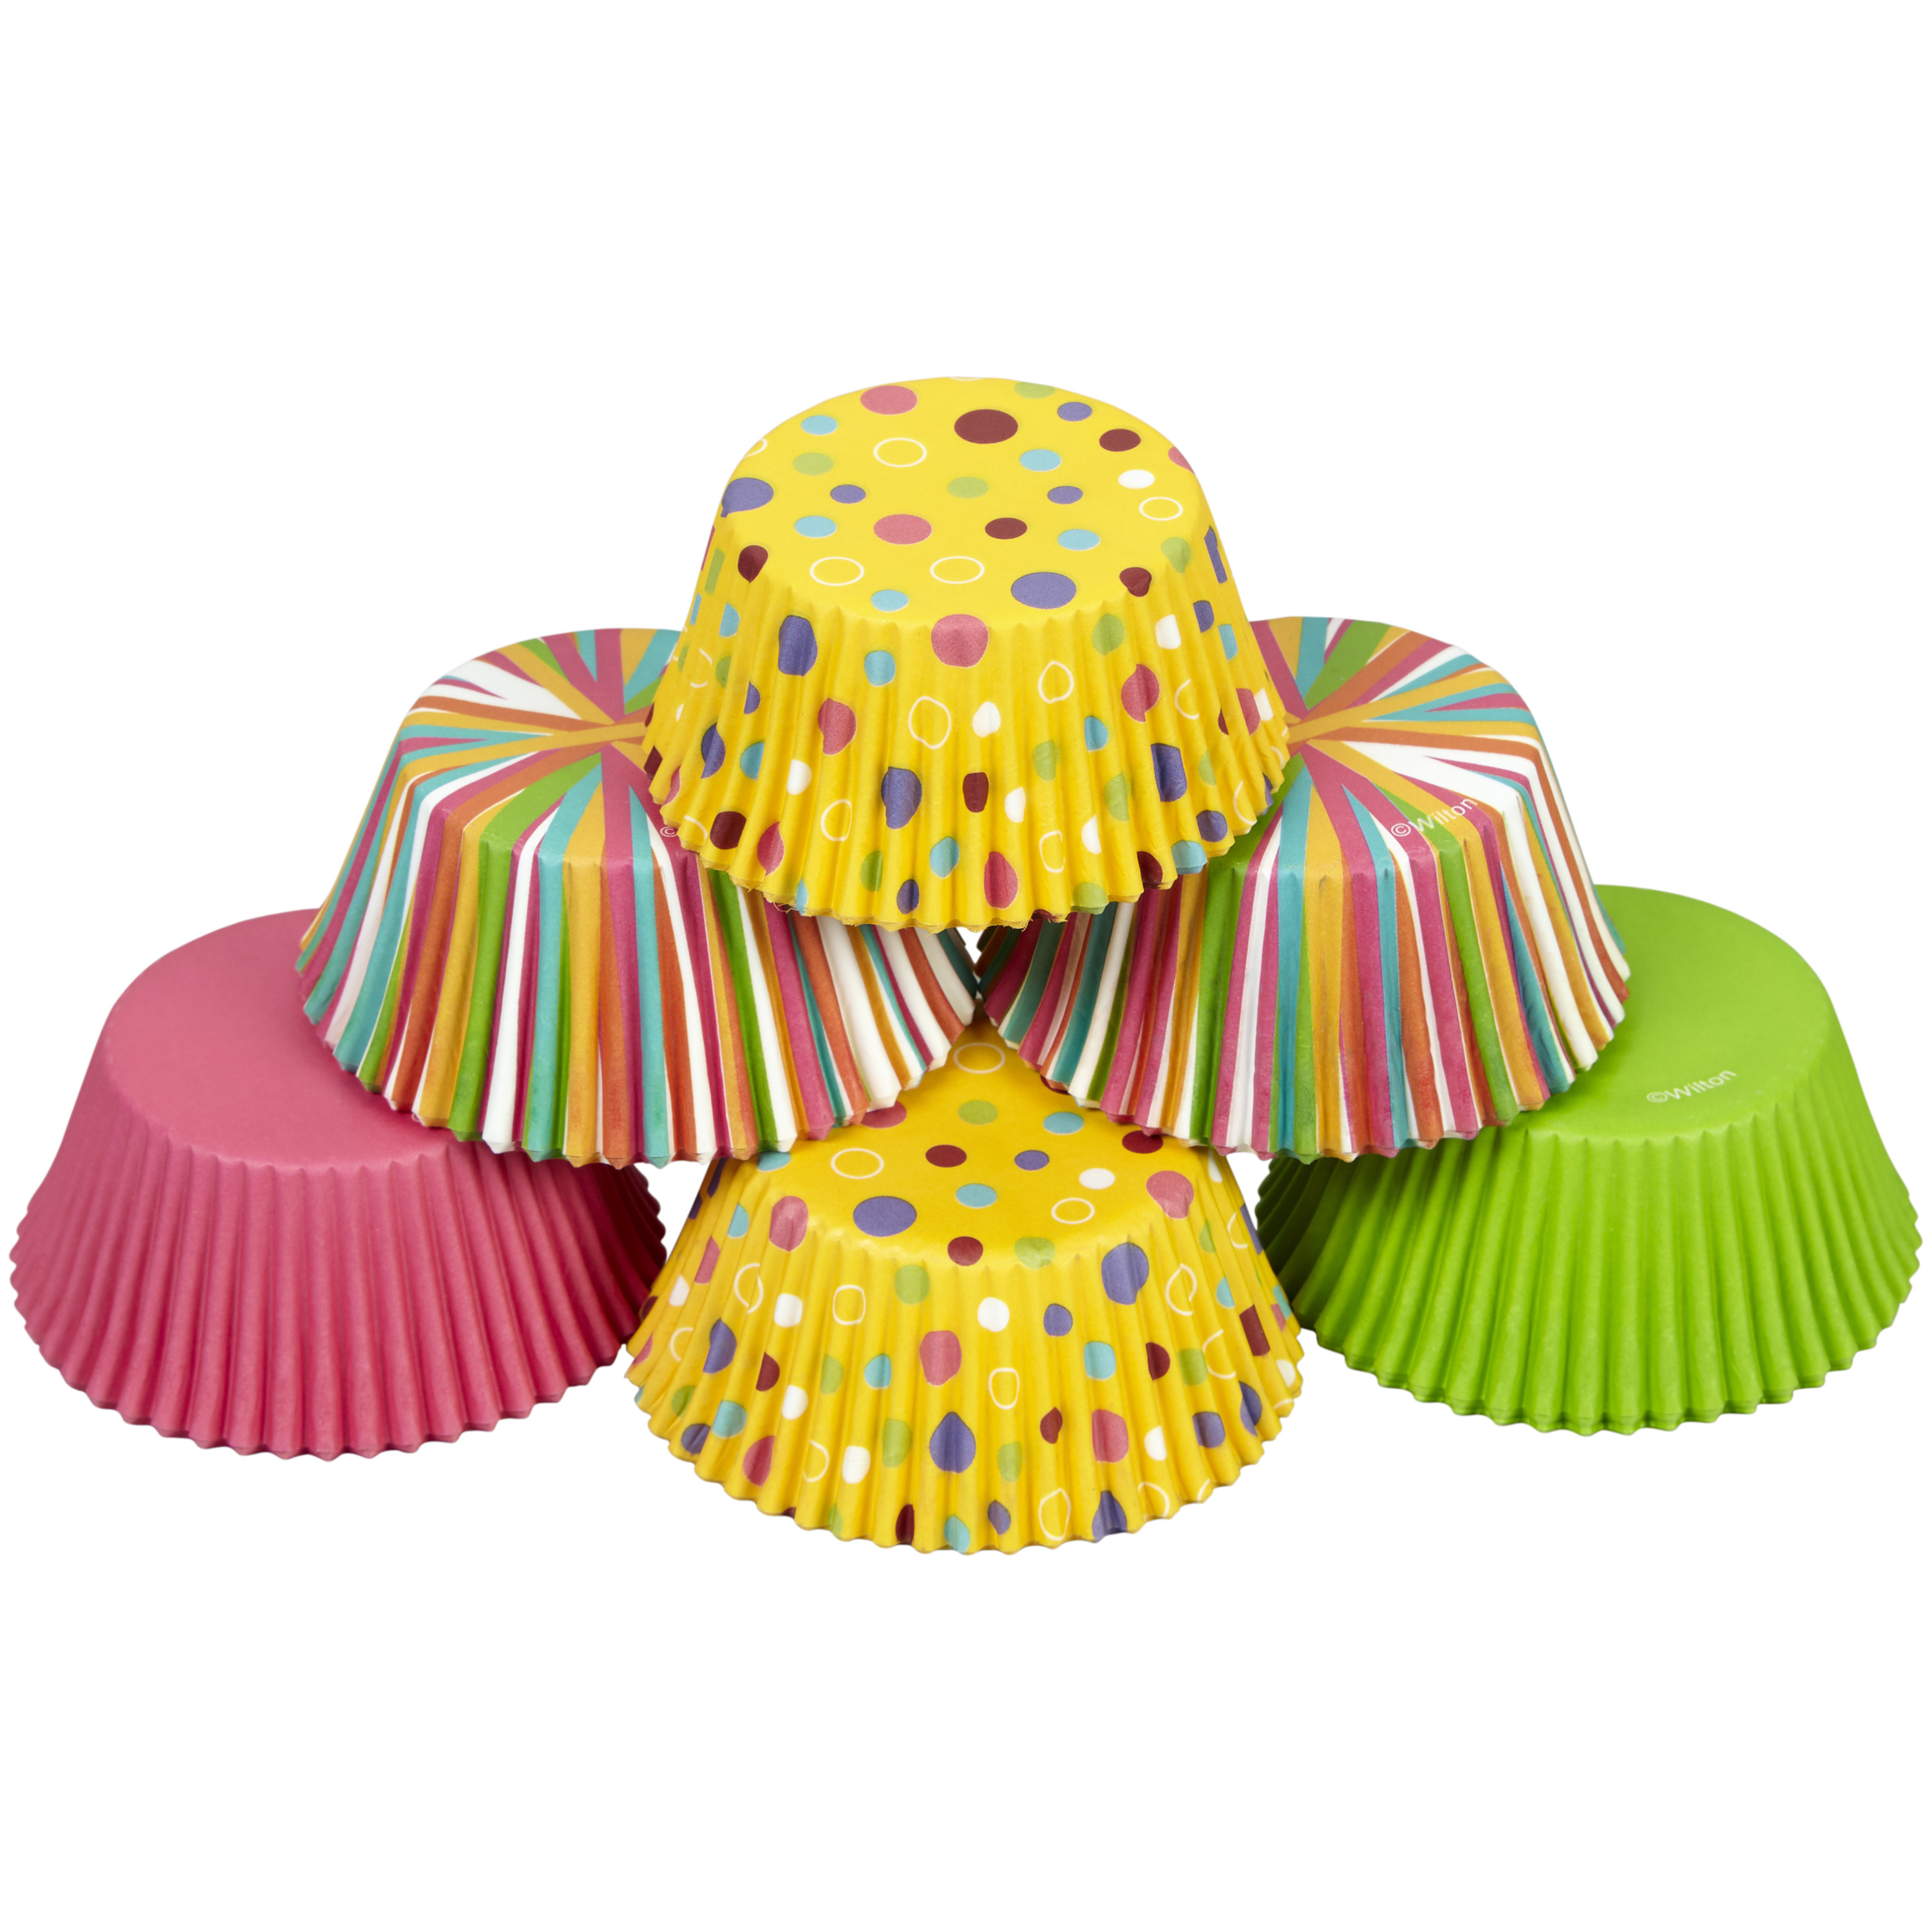 Wilton Stripes and Polka Dots Standard Cupcake Liners, 150-Count - image 4 of 4